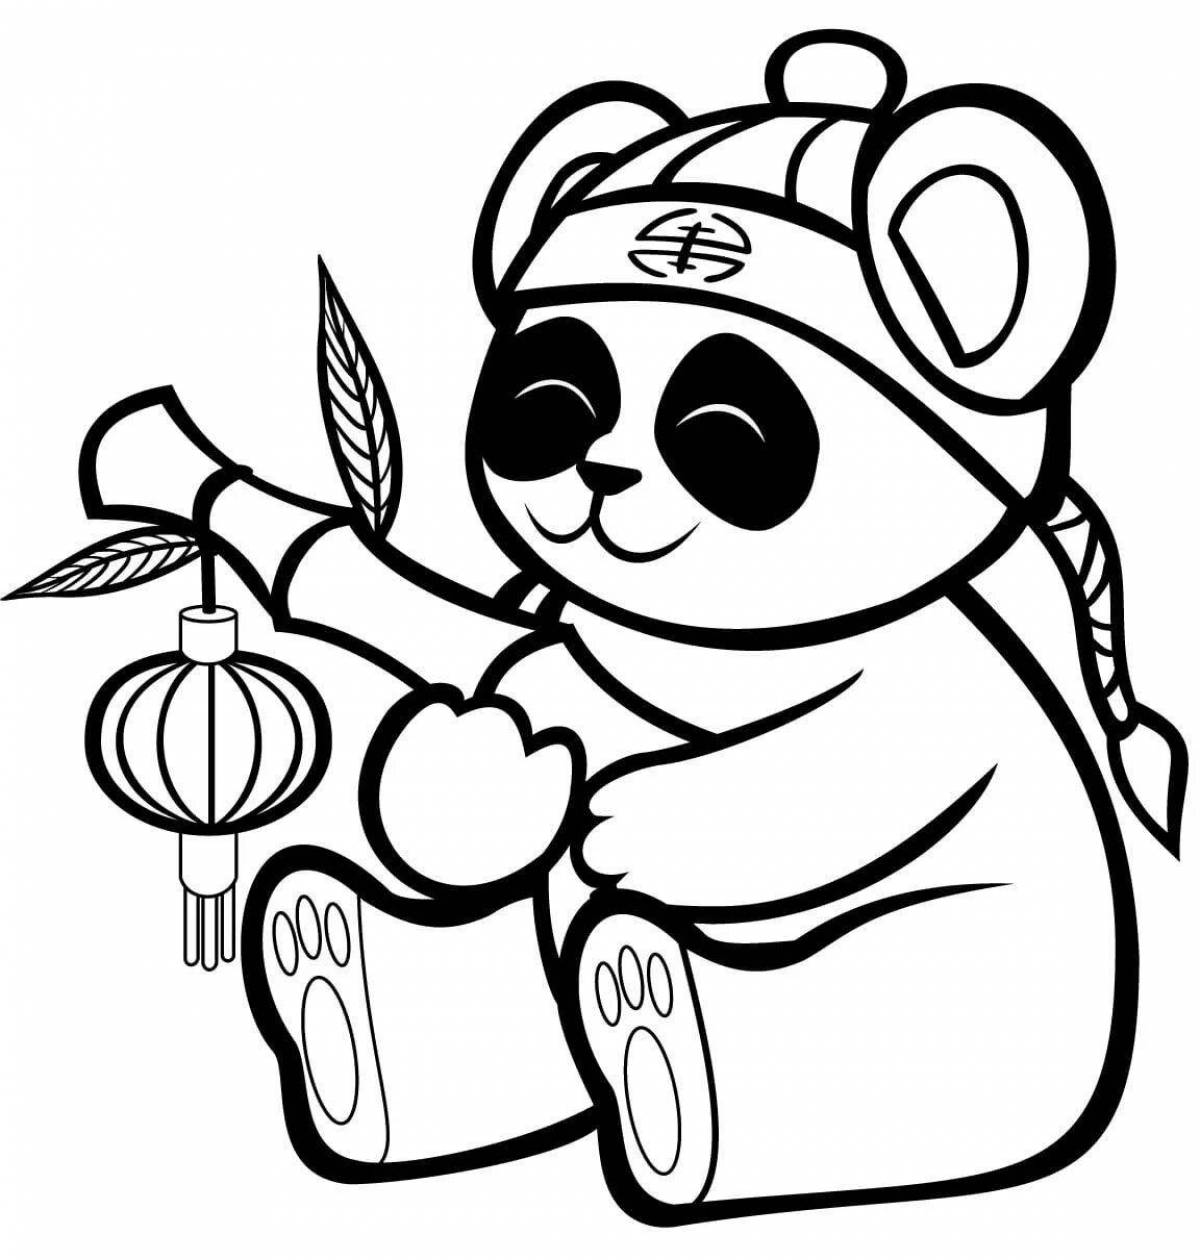 Live panda coloring pages for girls